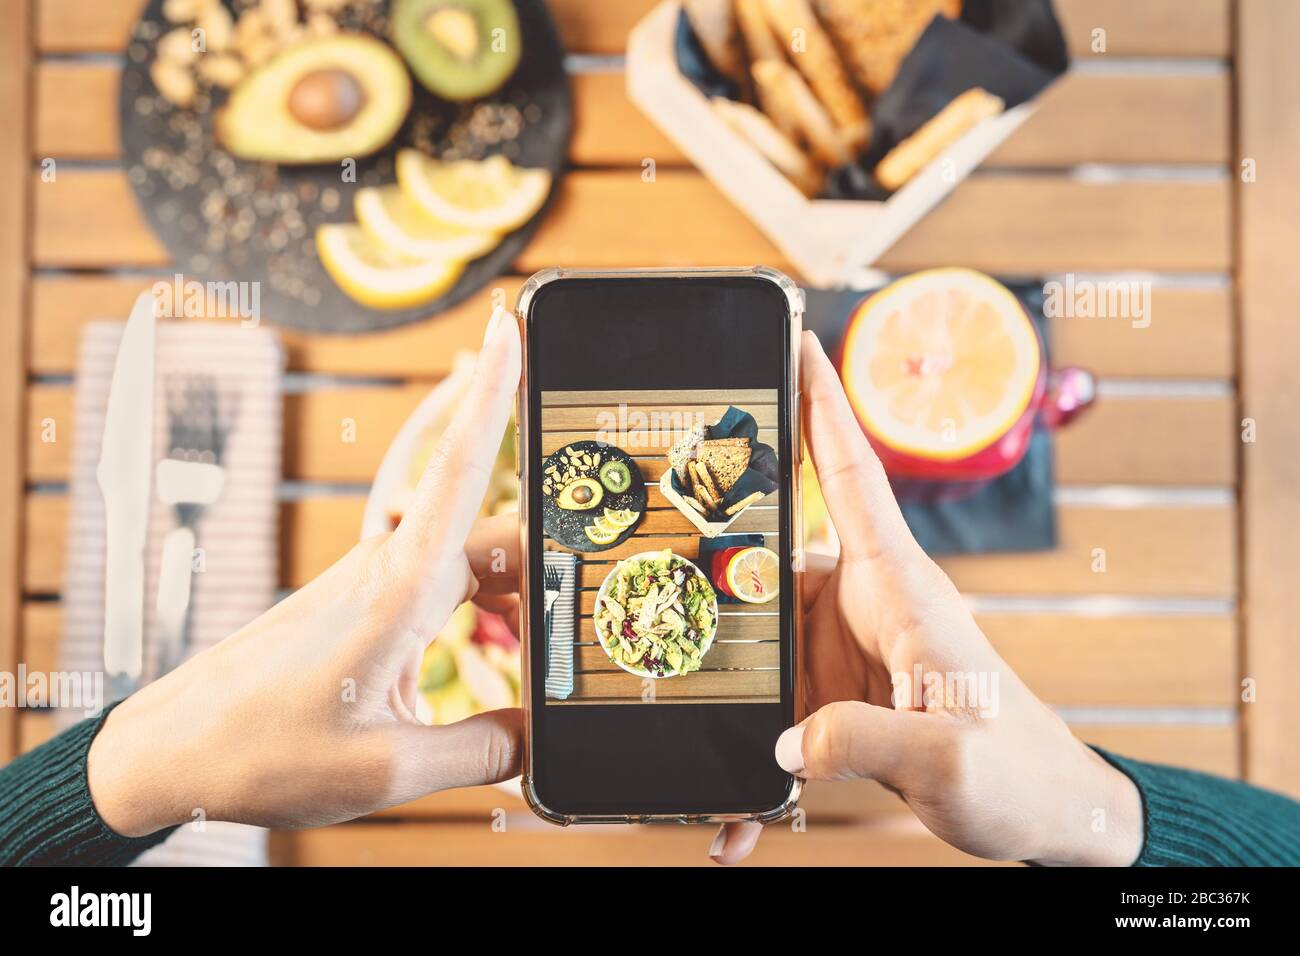 Top view female hands taking photo with mobile smartphone on health lunch food - Young girl having fun with new technology apps for social media Stock Photo